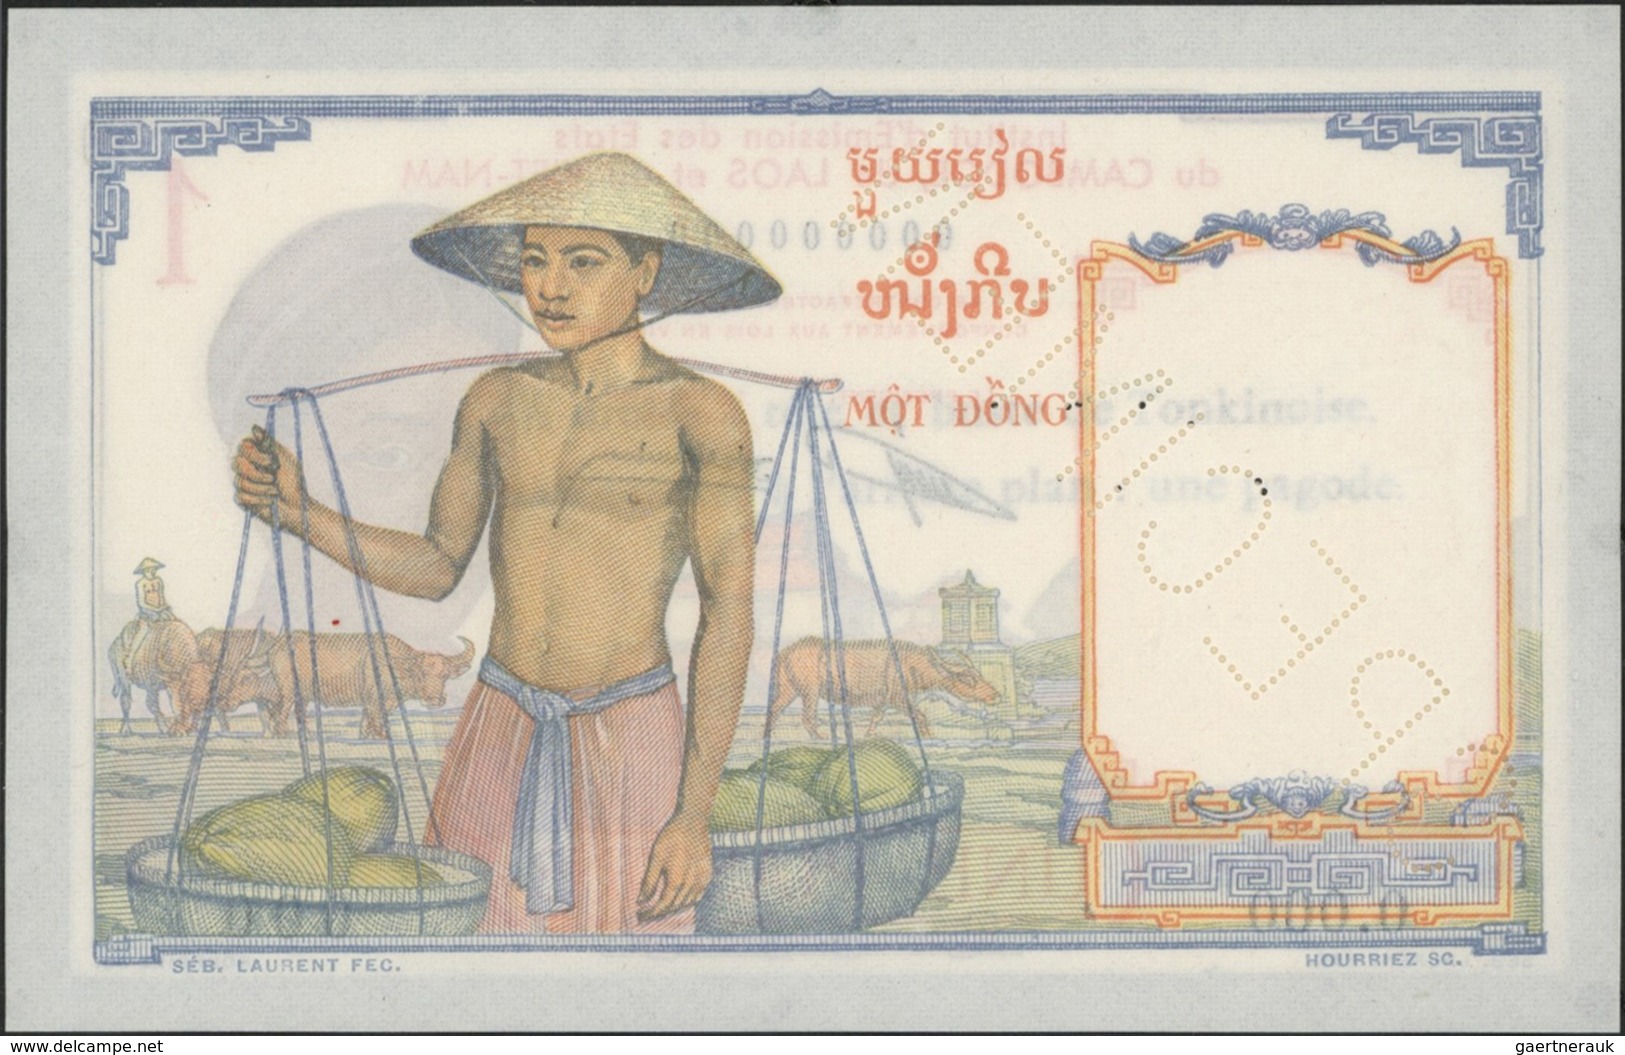 French Indochina / Französisch Indochina: Rare official presentation booklet from the "Institut d'Em